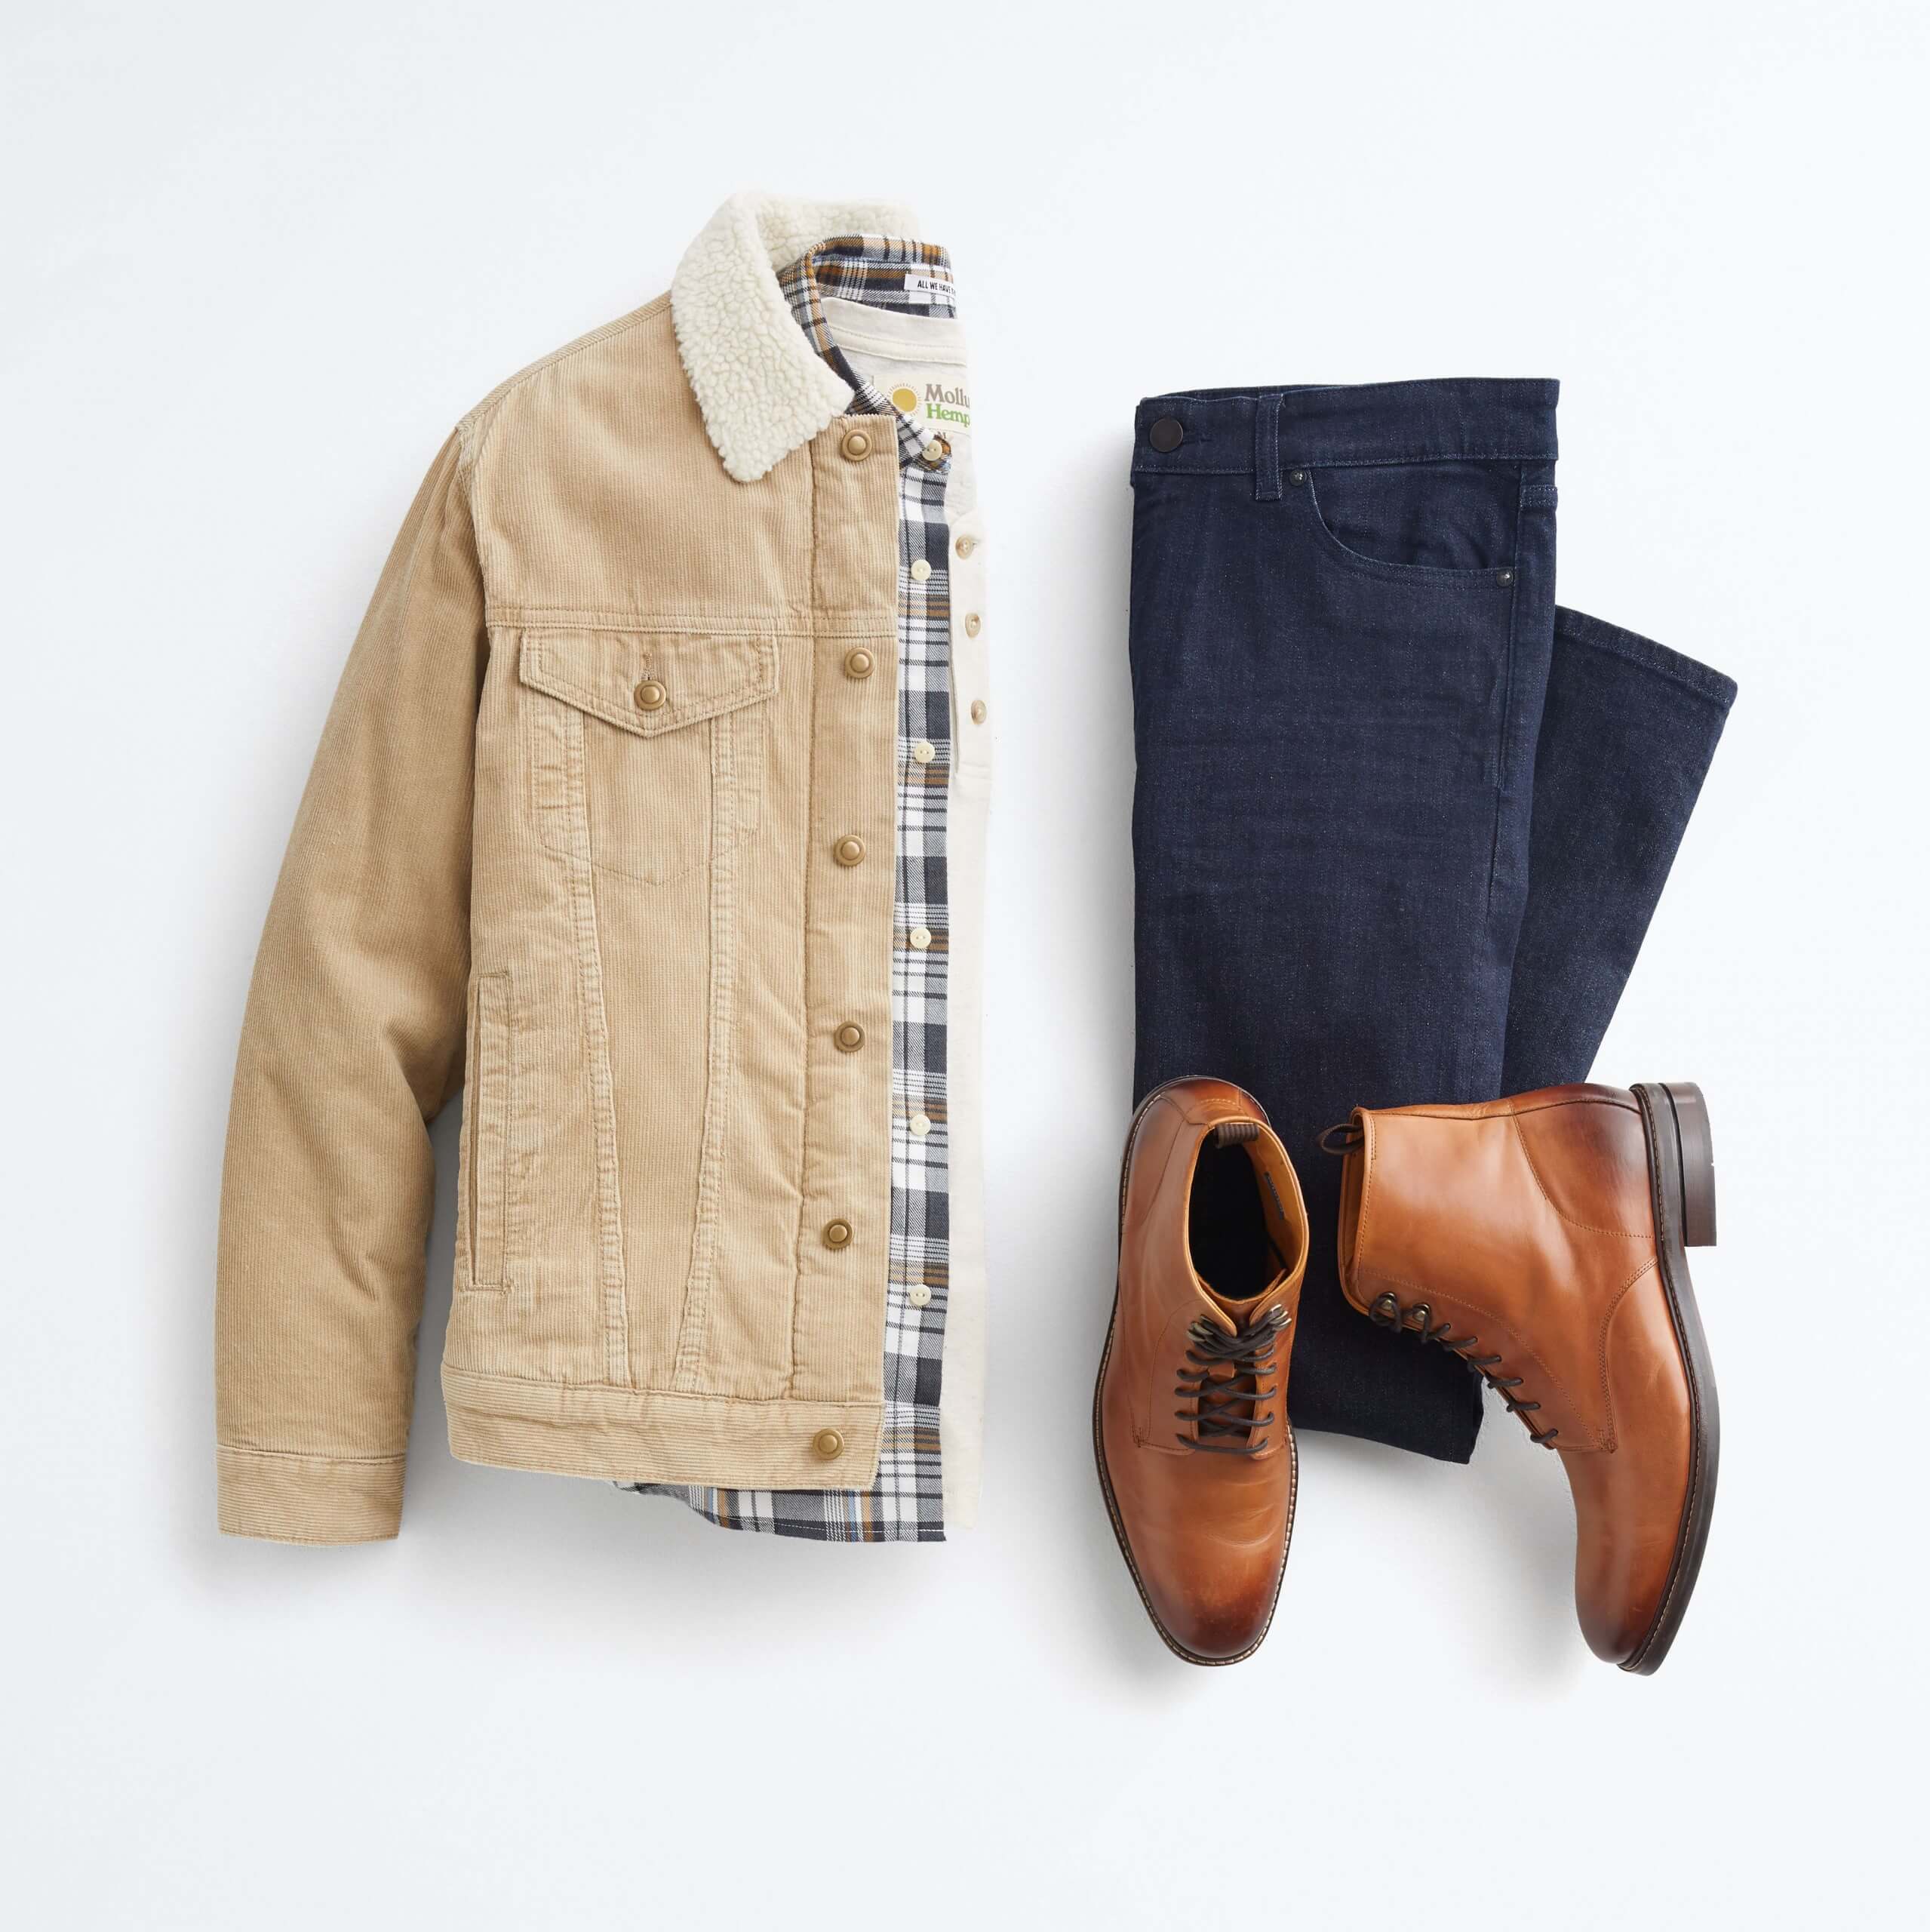 The Men's Fall Style Guide For 2021 - Best Fall Fashion Trends